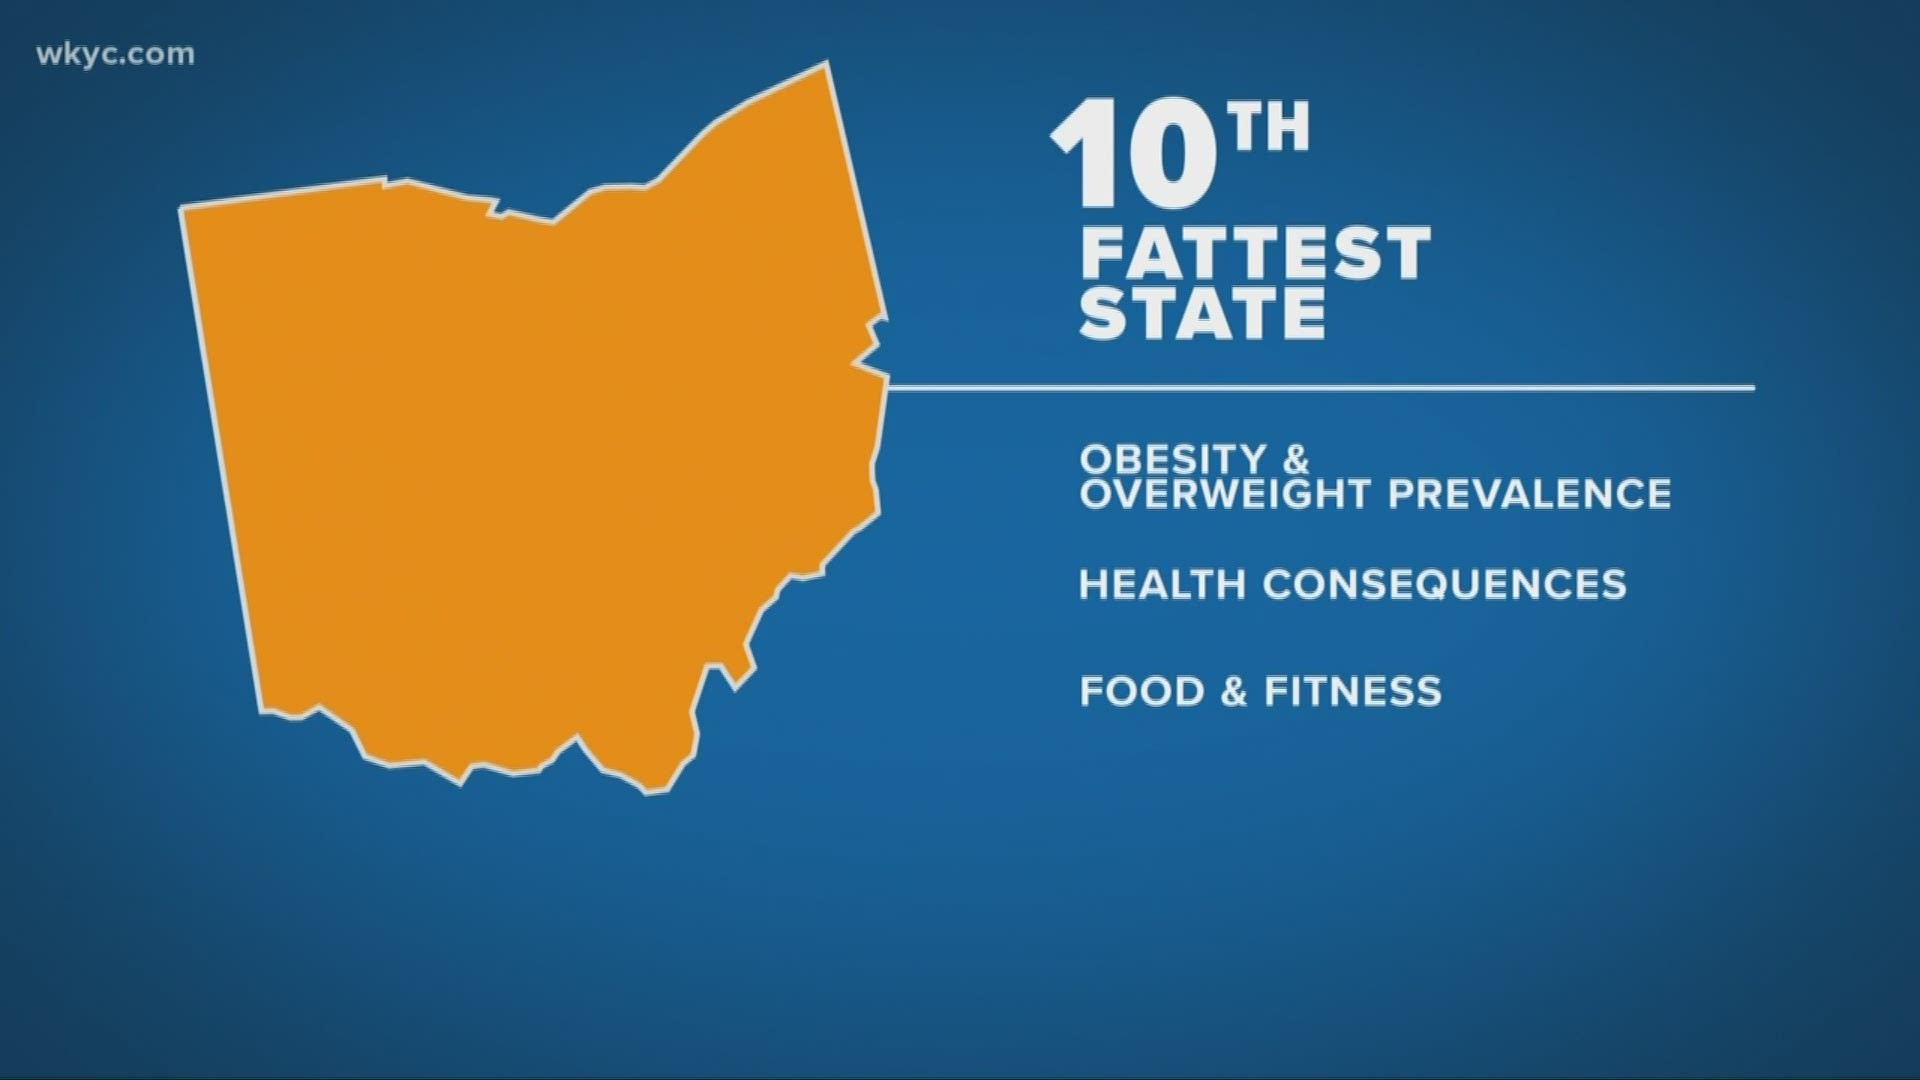 The new study by WalletHub compiled obesity rates, health effects and other factors in ranking the 50 states and the District of Columbia.